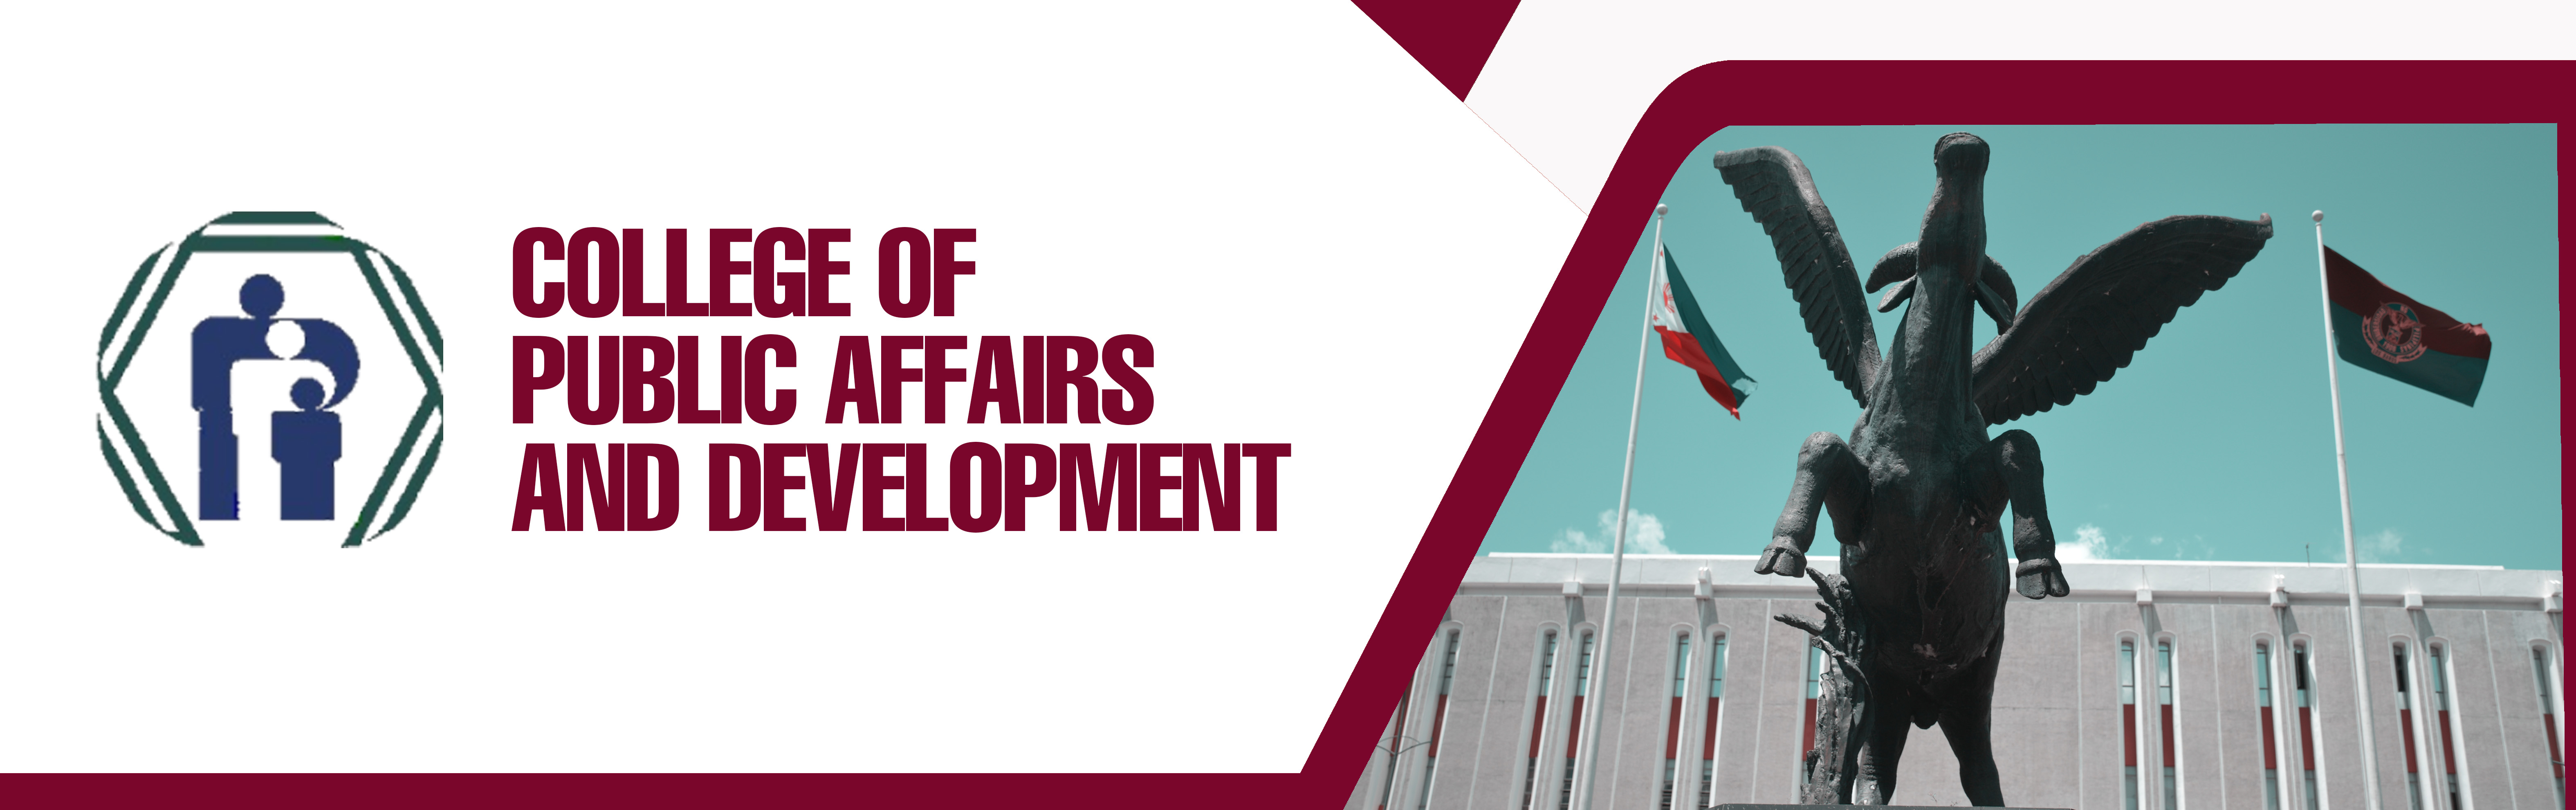 College of Public Affairs and Development (CPAf)